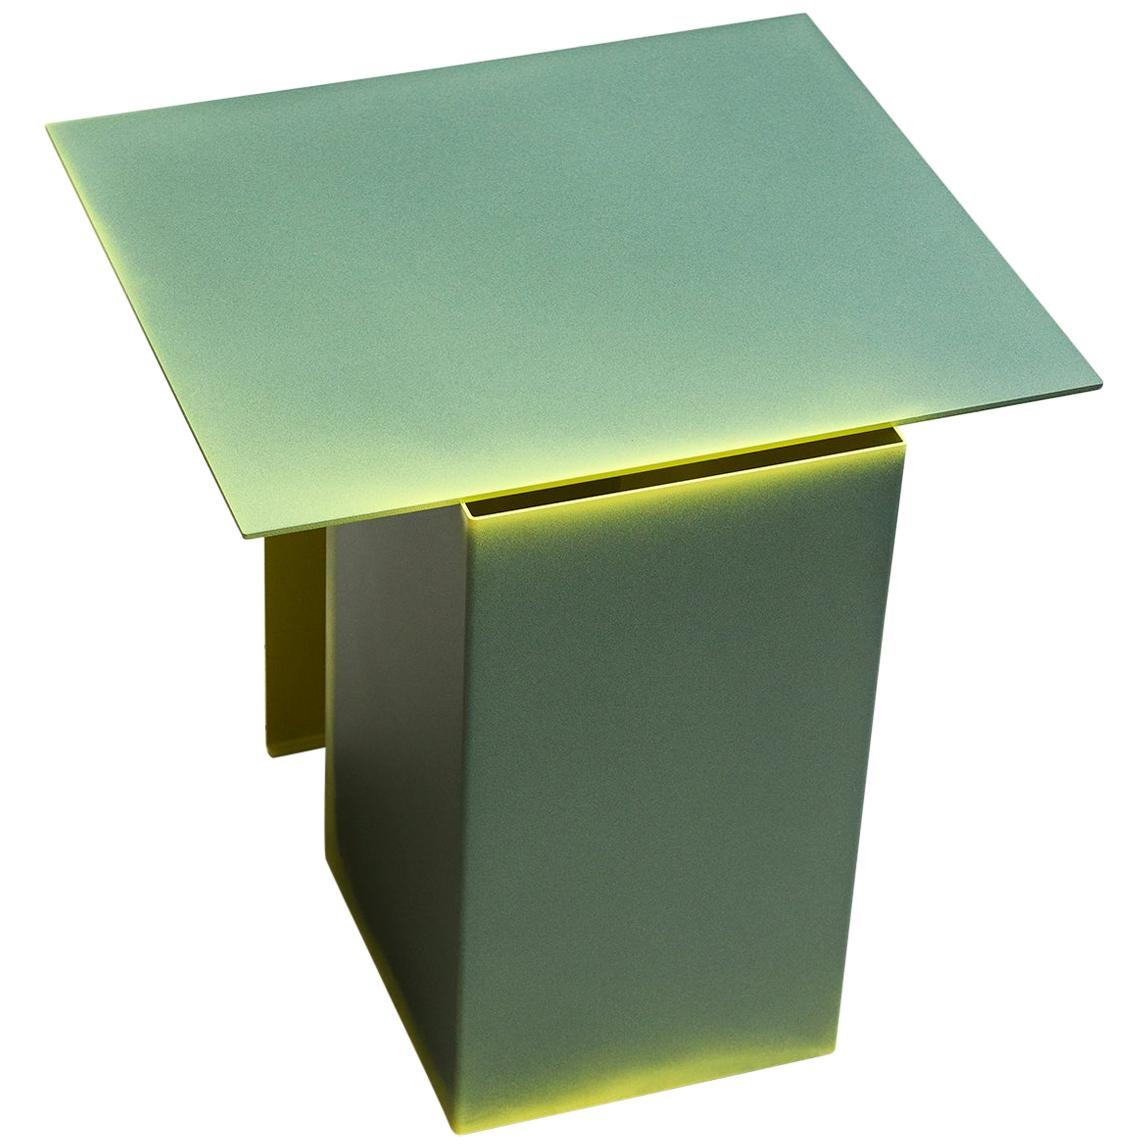 Tacchini Daze Low Table in Green Sage with Yellow Shade by Truly Truly